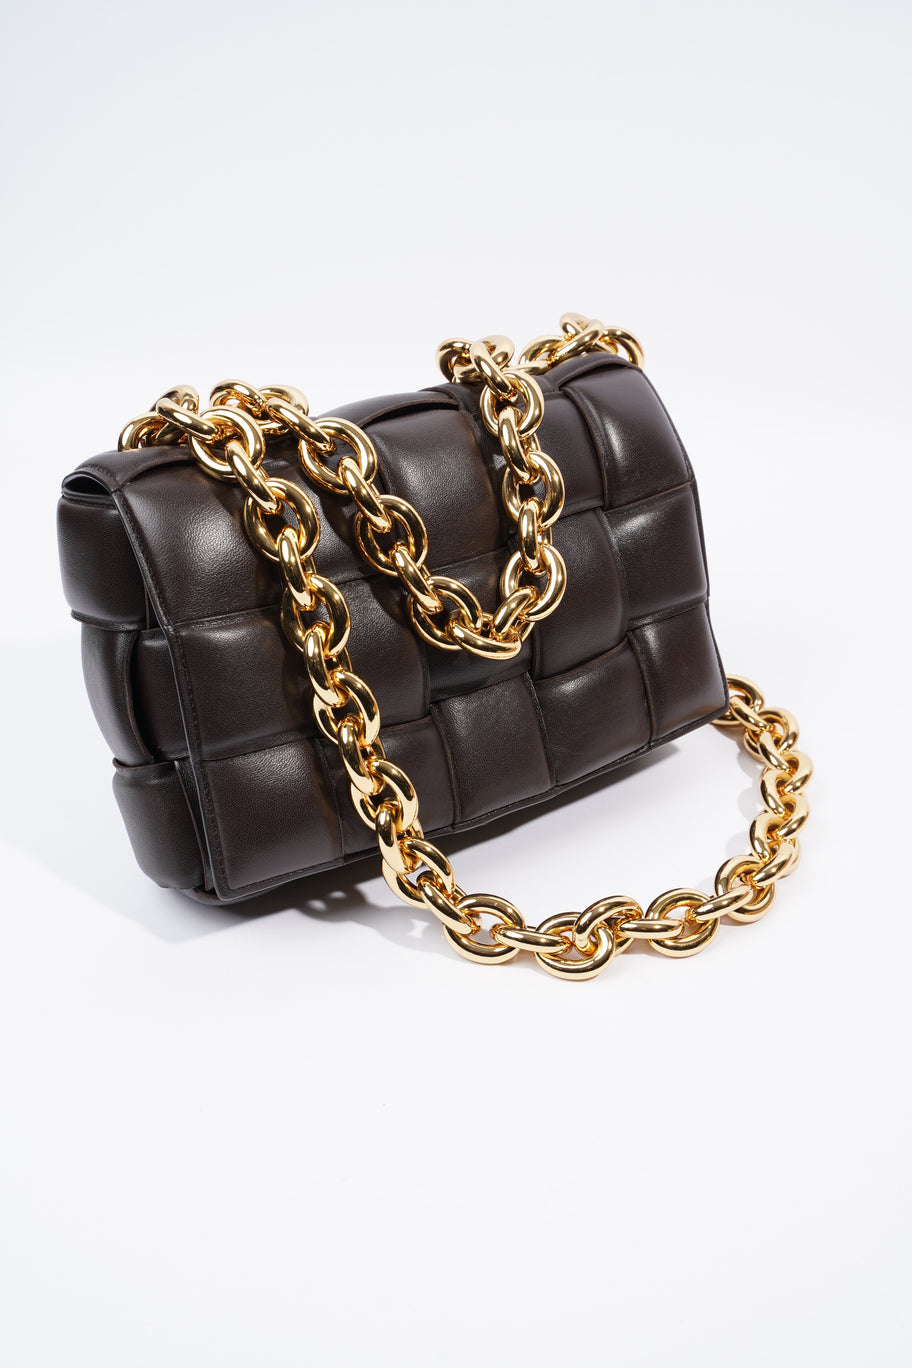 Chain Cassette Brown Nappa Leather Image 8